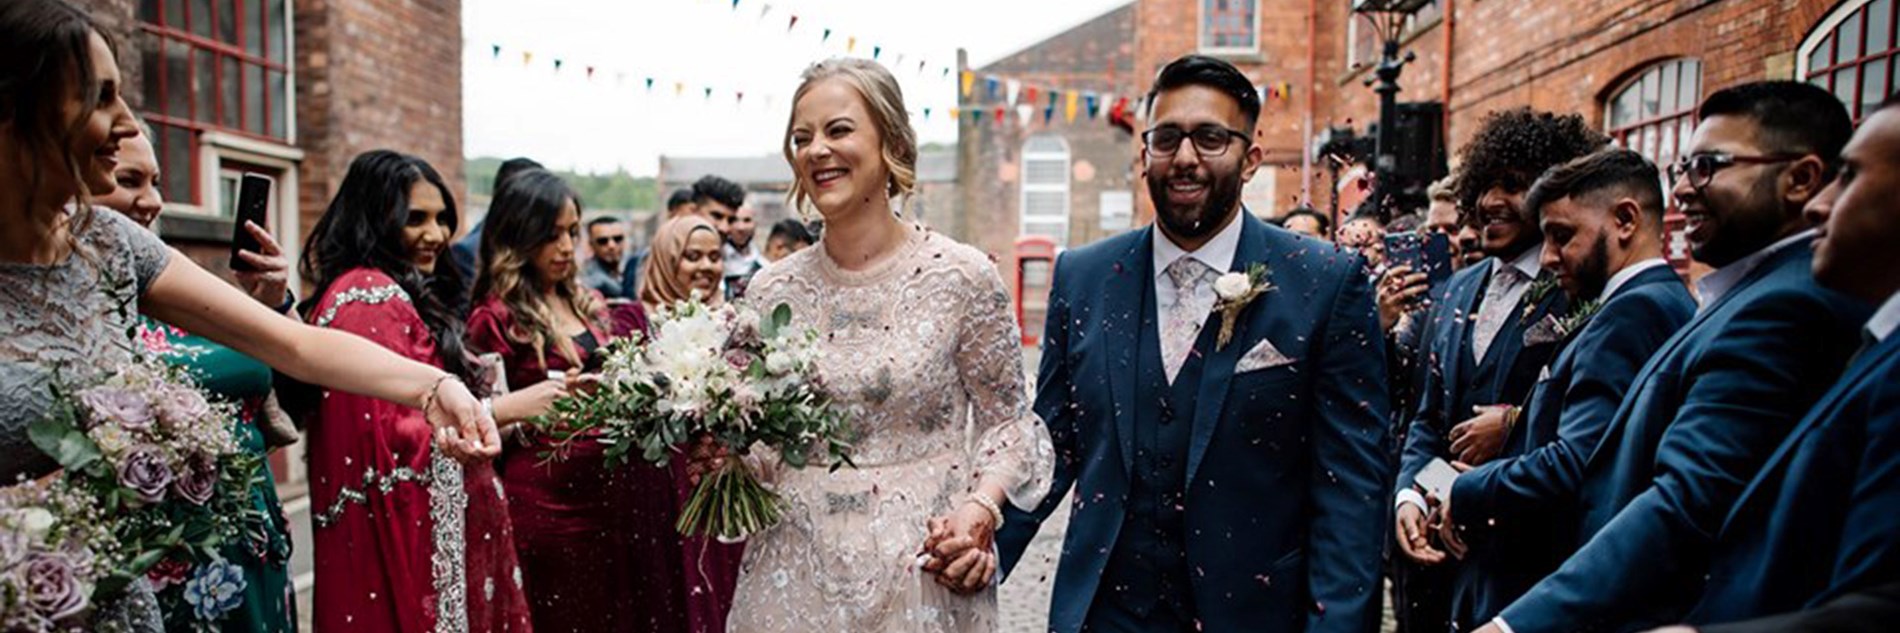 Two adults  in wedding outfits being showered with confetti by a crowd of people outside Kelham Island Museum